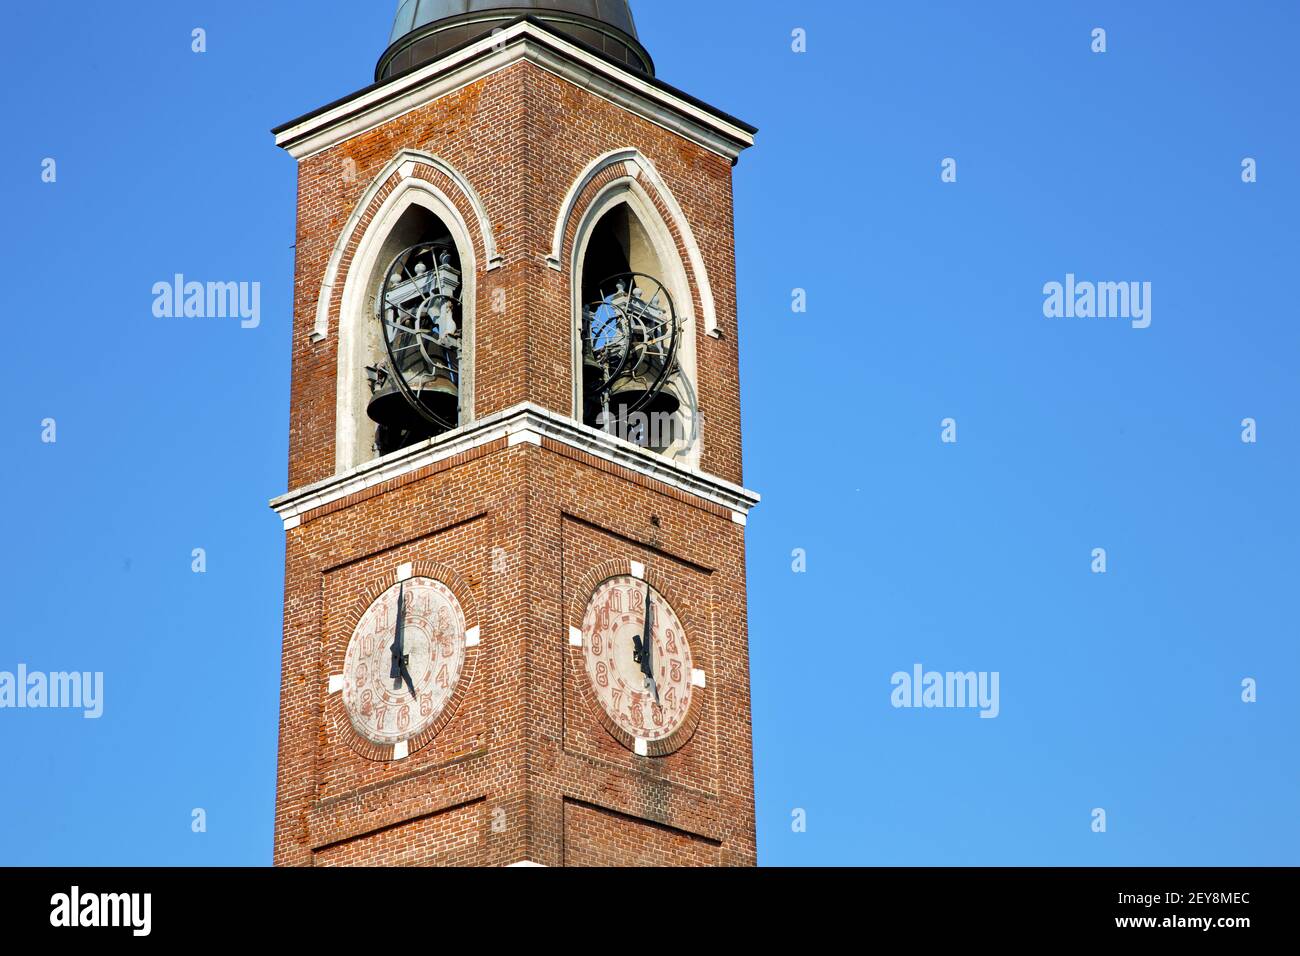 Varano borghi old abstract in  italy   the    and church tower bell sunny day Stock Photo